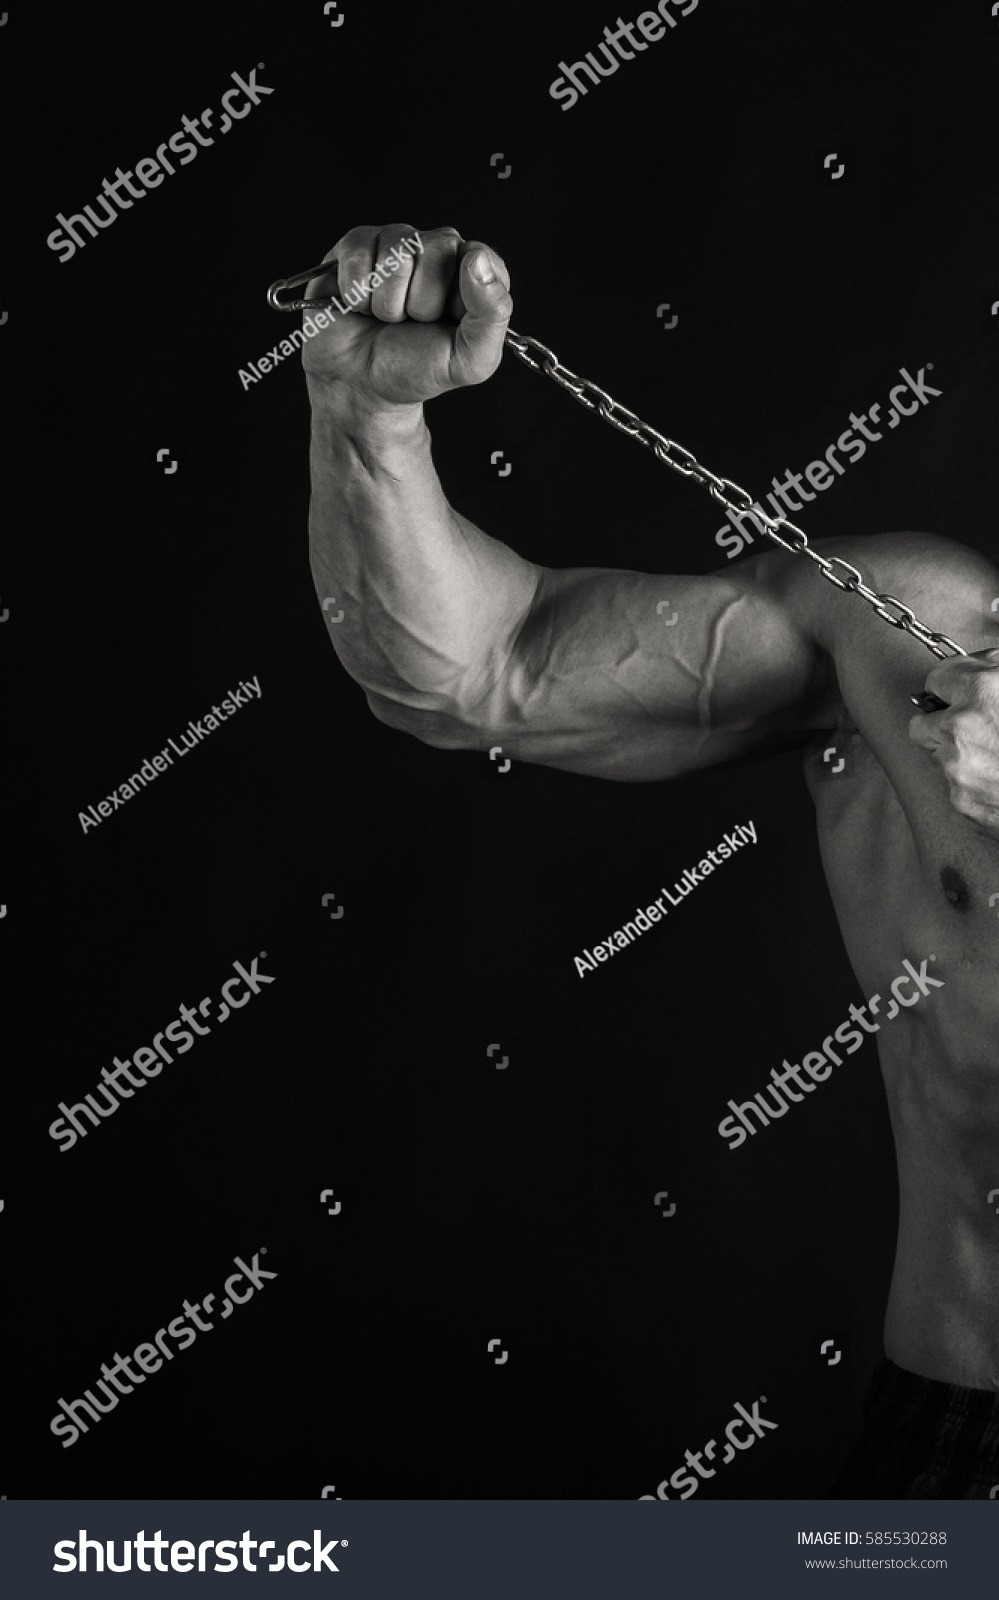 Bodybuilder posing in different poses demonstrating their muscles. Failure on a dark background. Male showing muscles straining. Beautiful muscular body athlete. #585530288